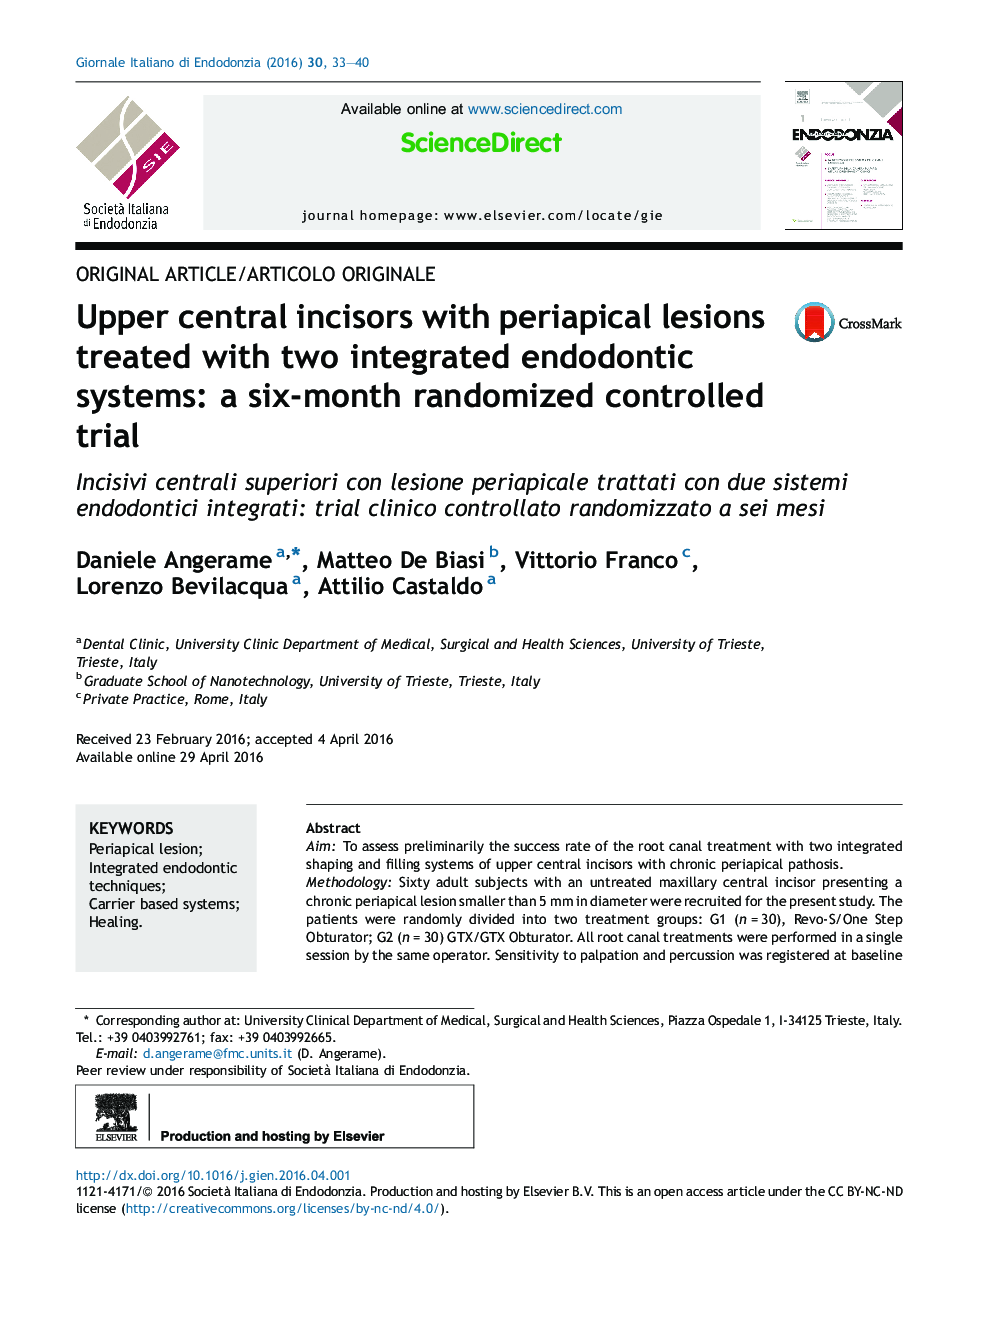 Upper central incisors with periapical lesions treated with two integrated endodontic systems: a six-month randomized controlled trial 